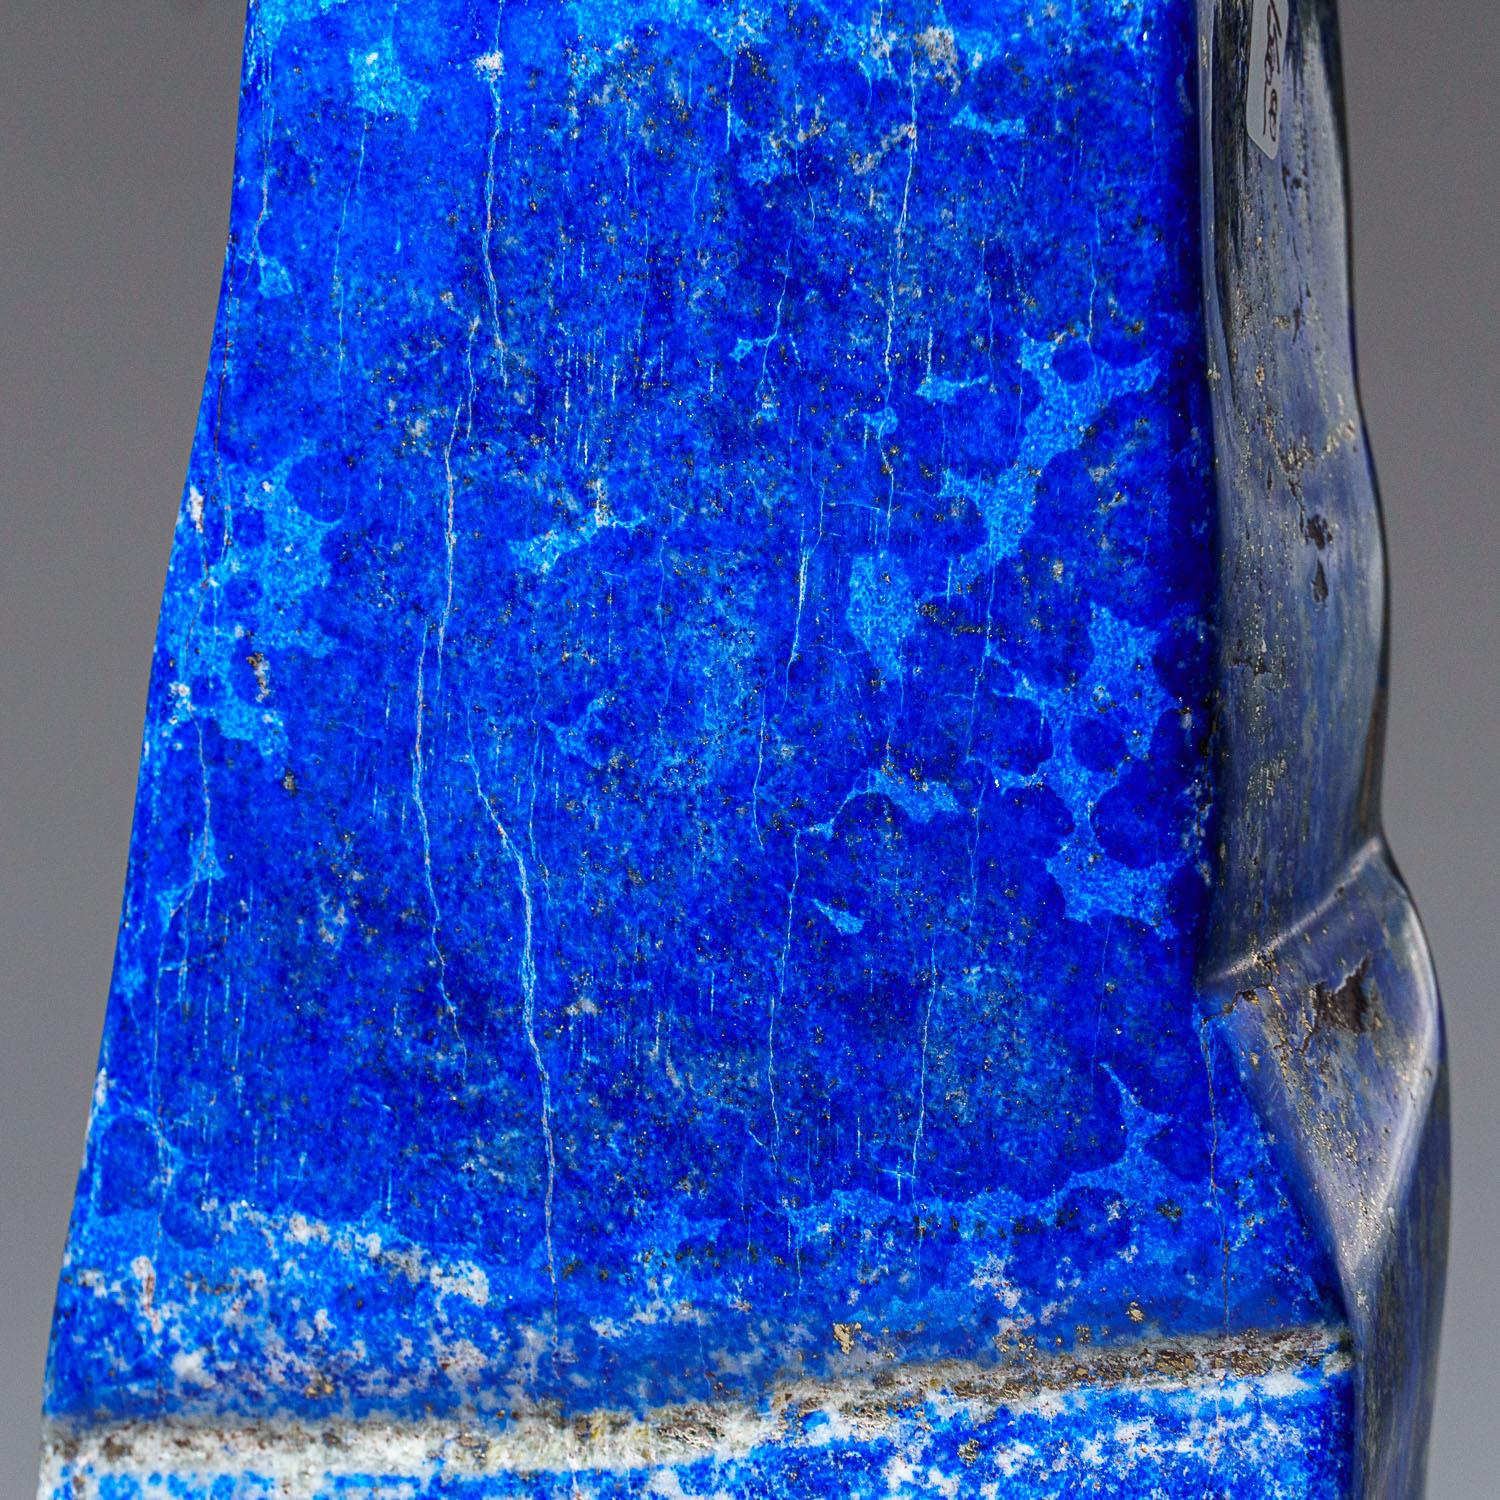 Contemporary Genuine Polished Lapis Lazuli Freeform from Afghanistan, '6.5 Lbs' For Sale